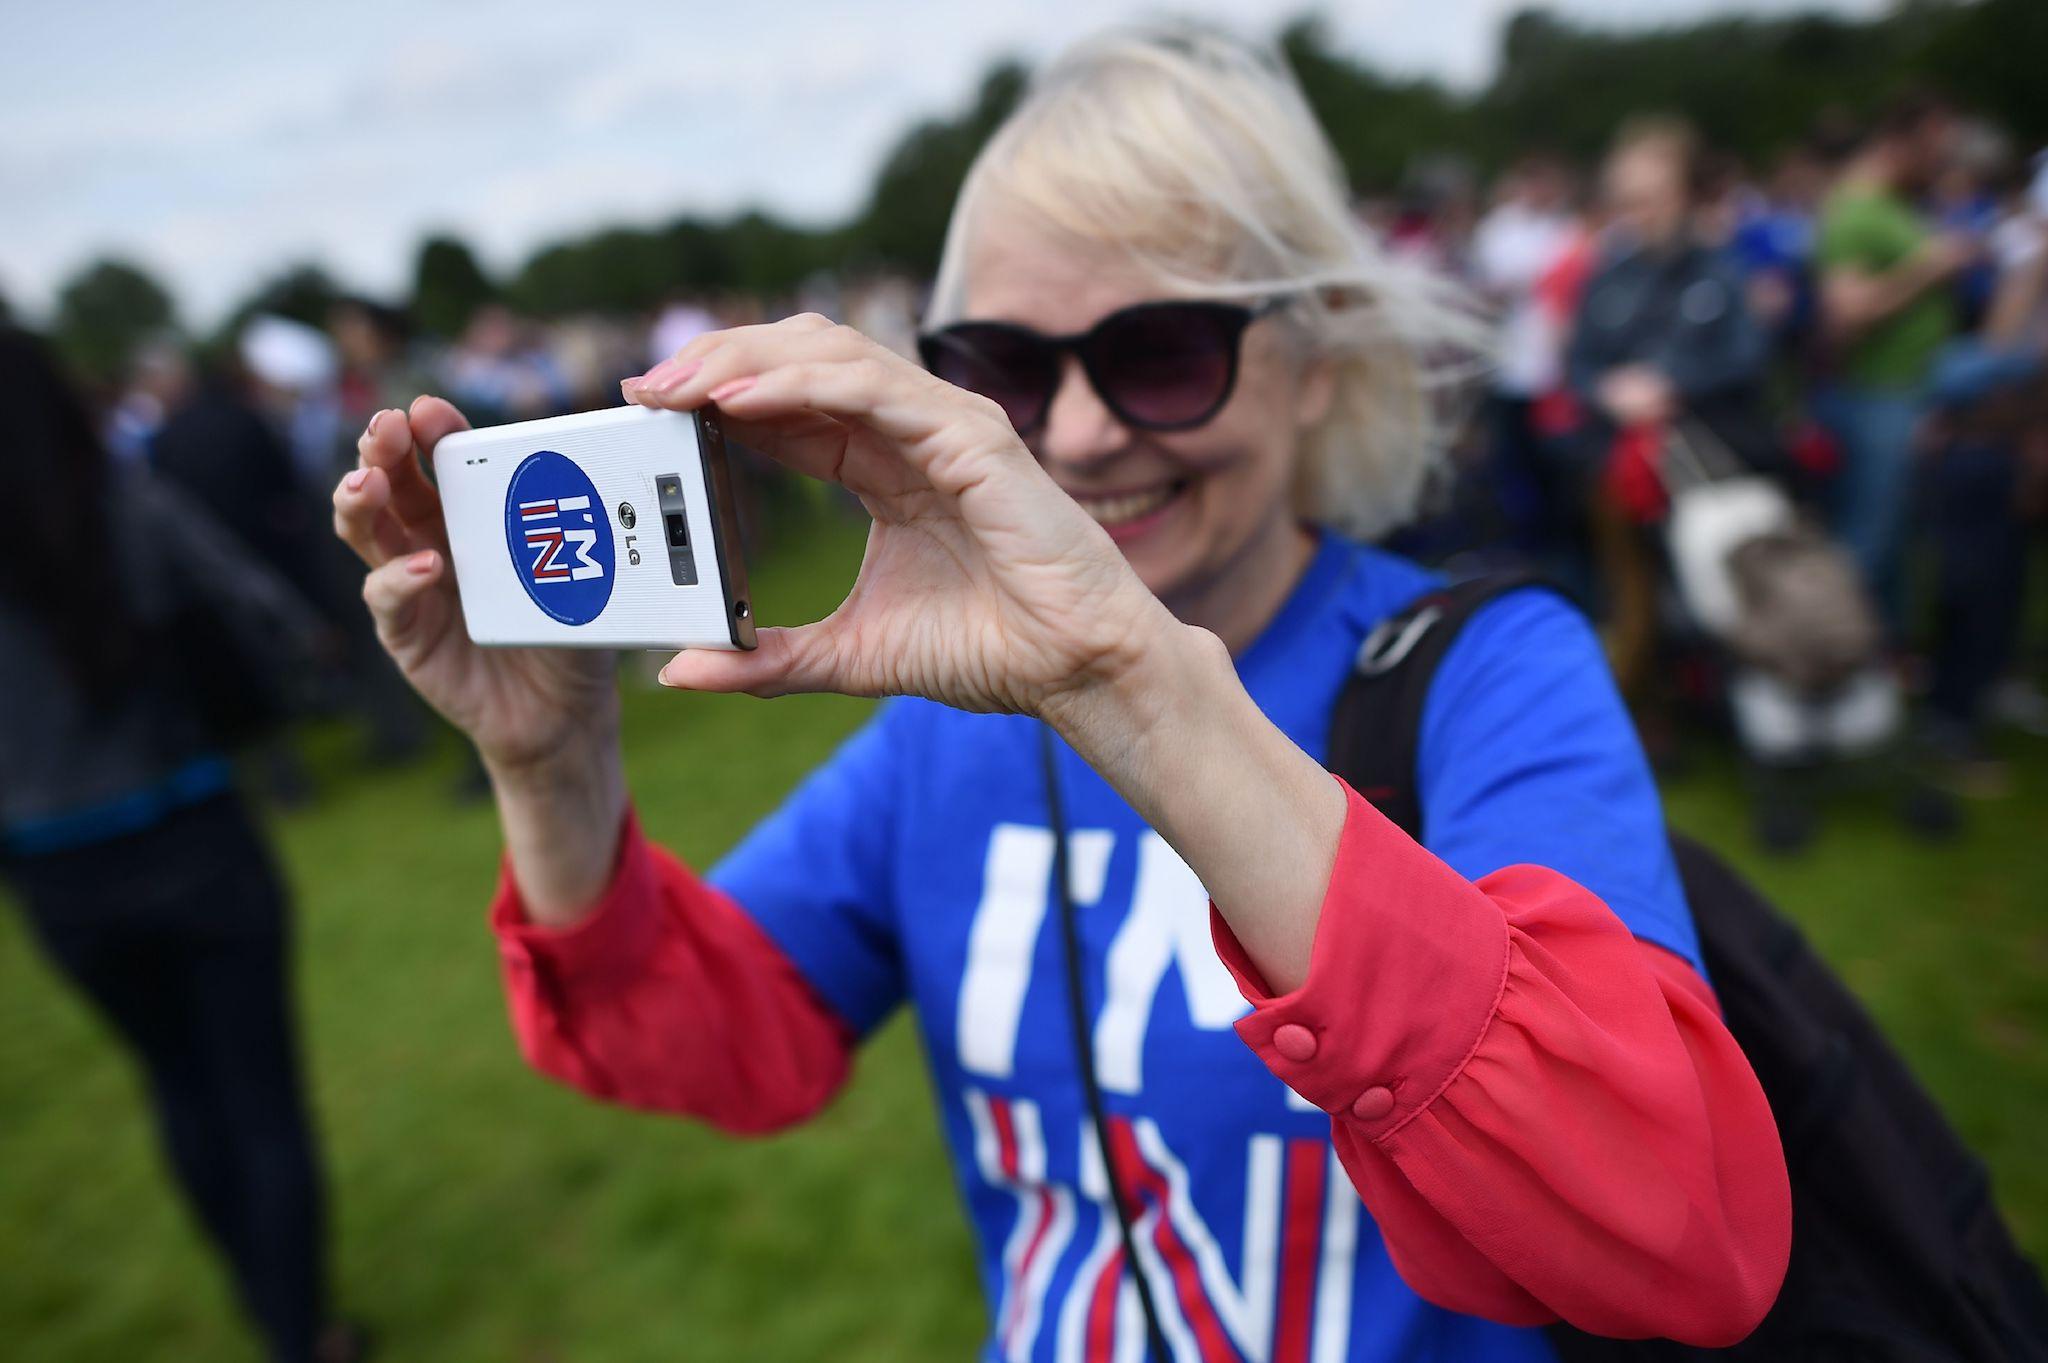 A woman uses a smartphone to take a photograph as she attends a rally for 'Britain Stronger in Europe', the official 'Remain' campaign group seeking to a avoid Brexit